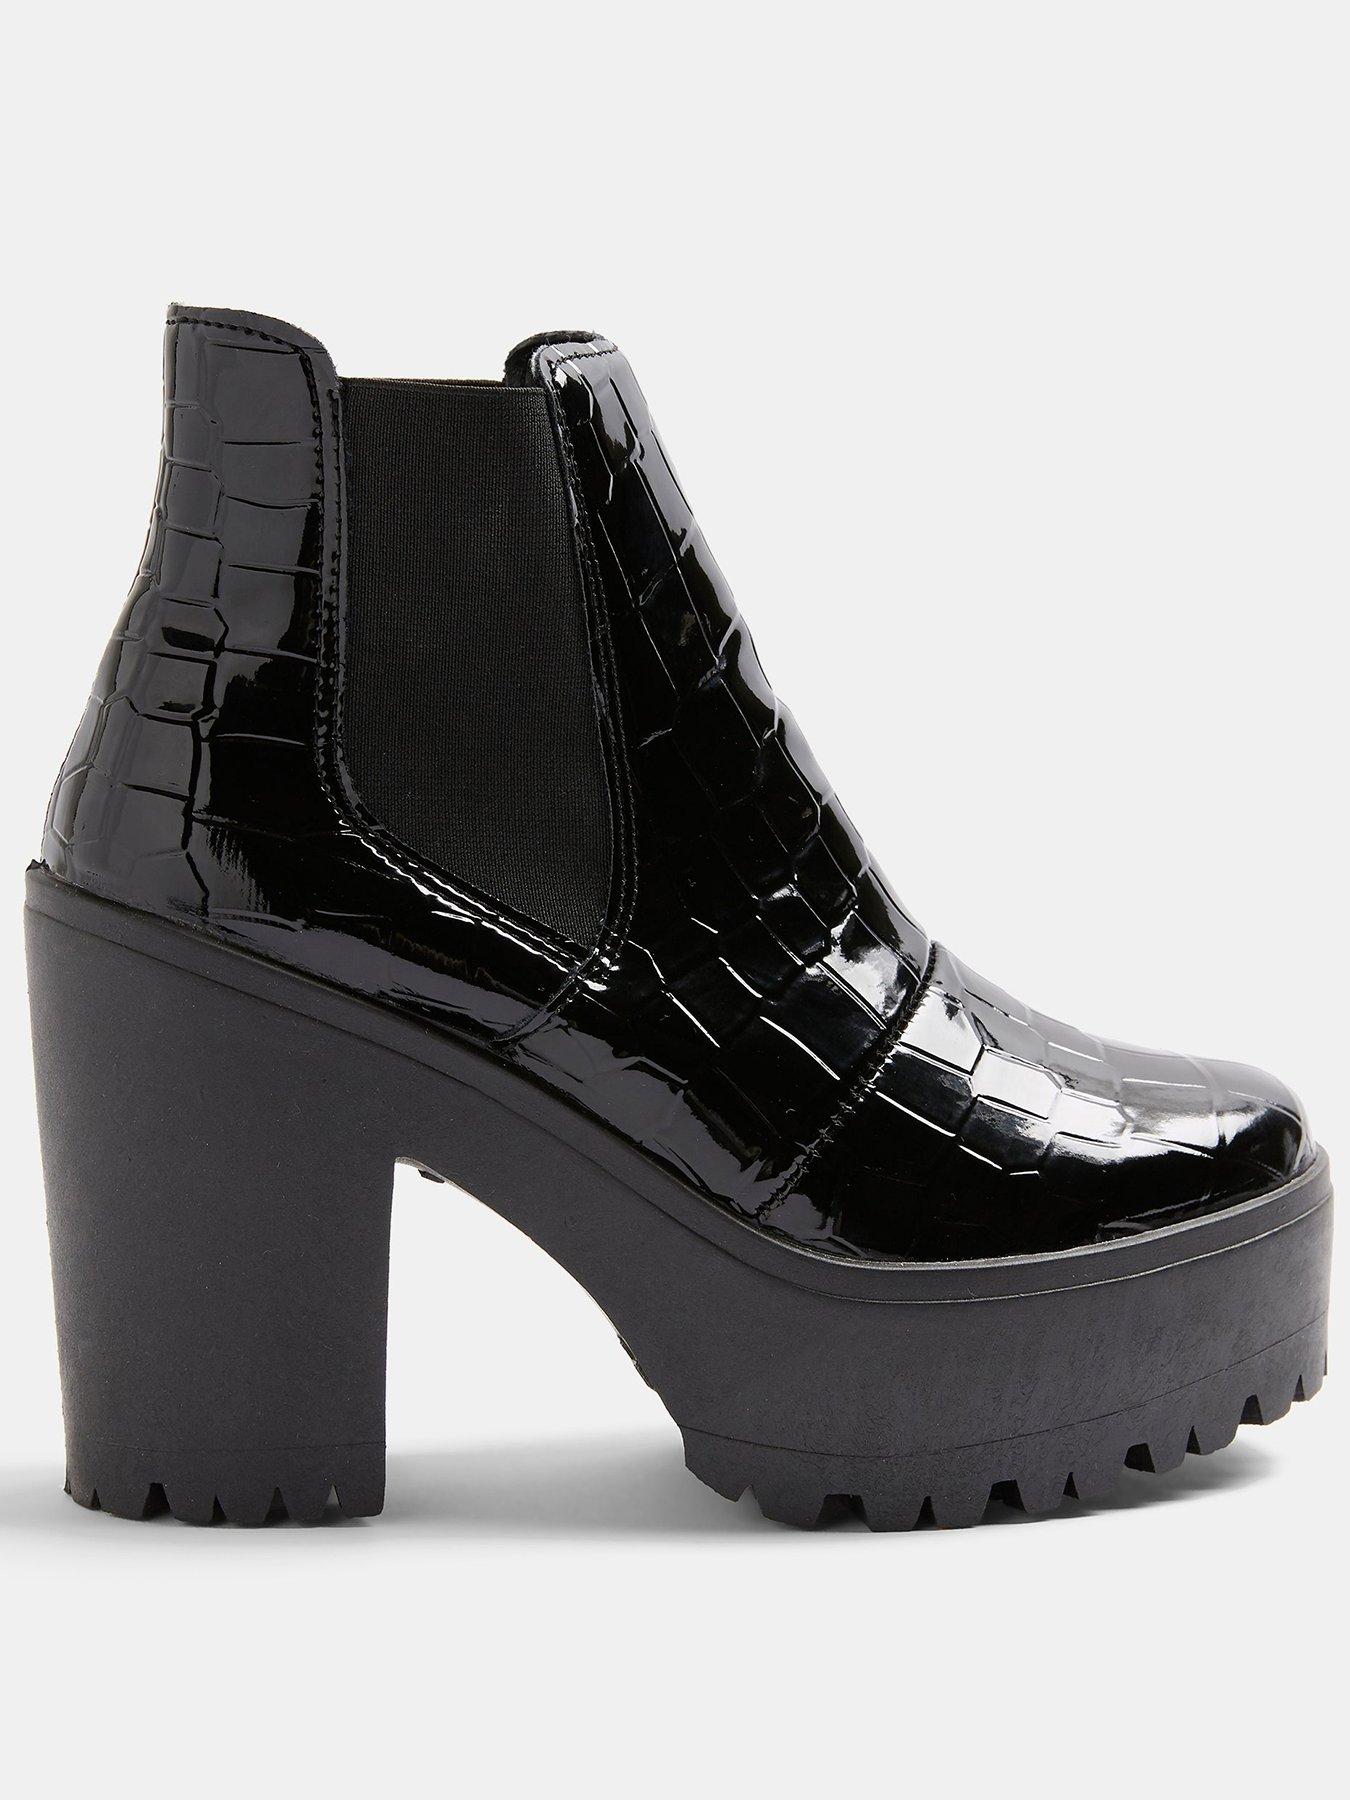 Topshop Shoes | Topshop Boots | Very.co.uk